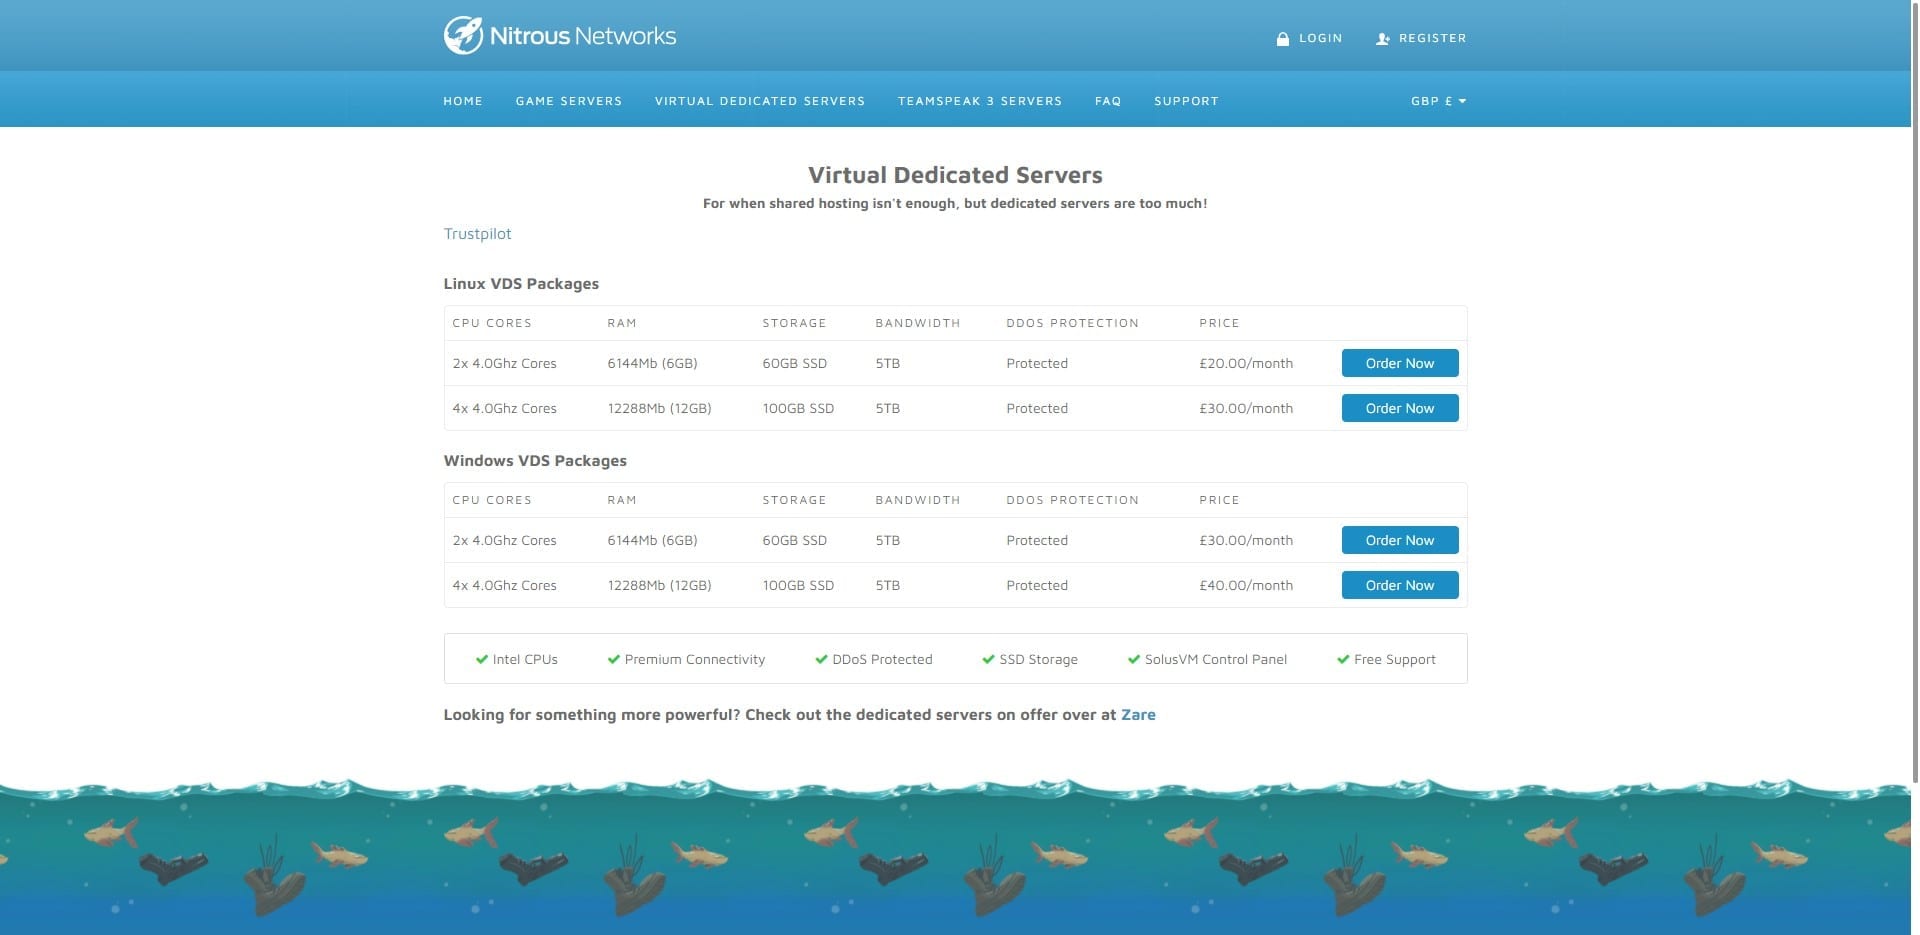 Nitrous-Networks Virtual Dedicated Servers Overview